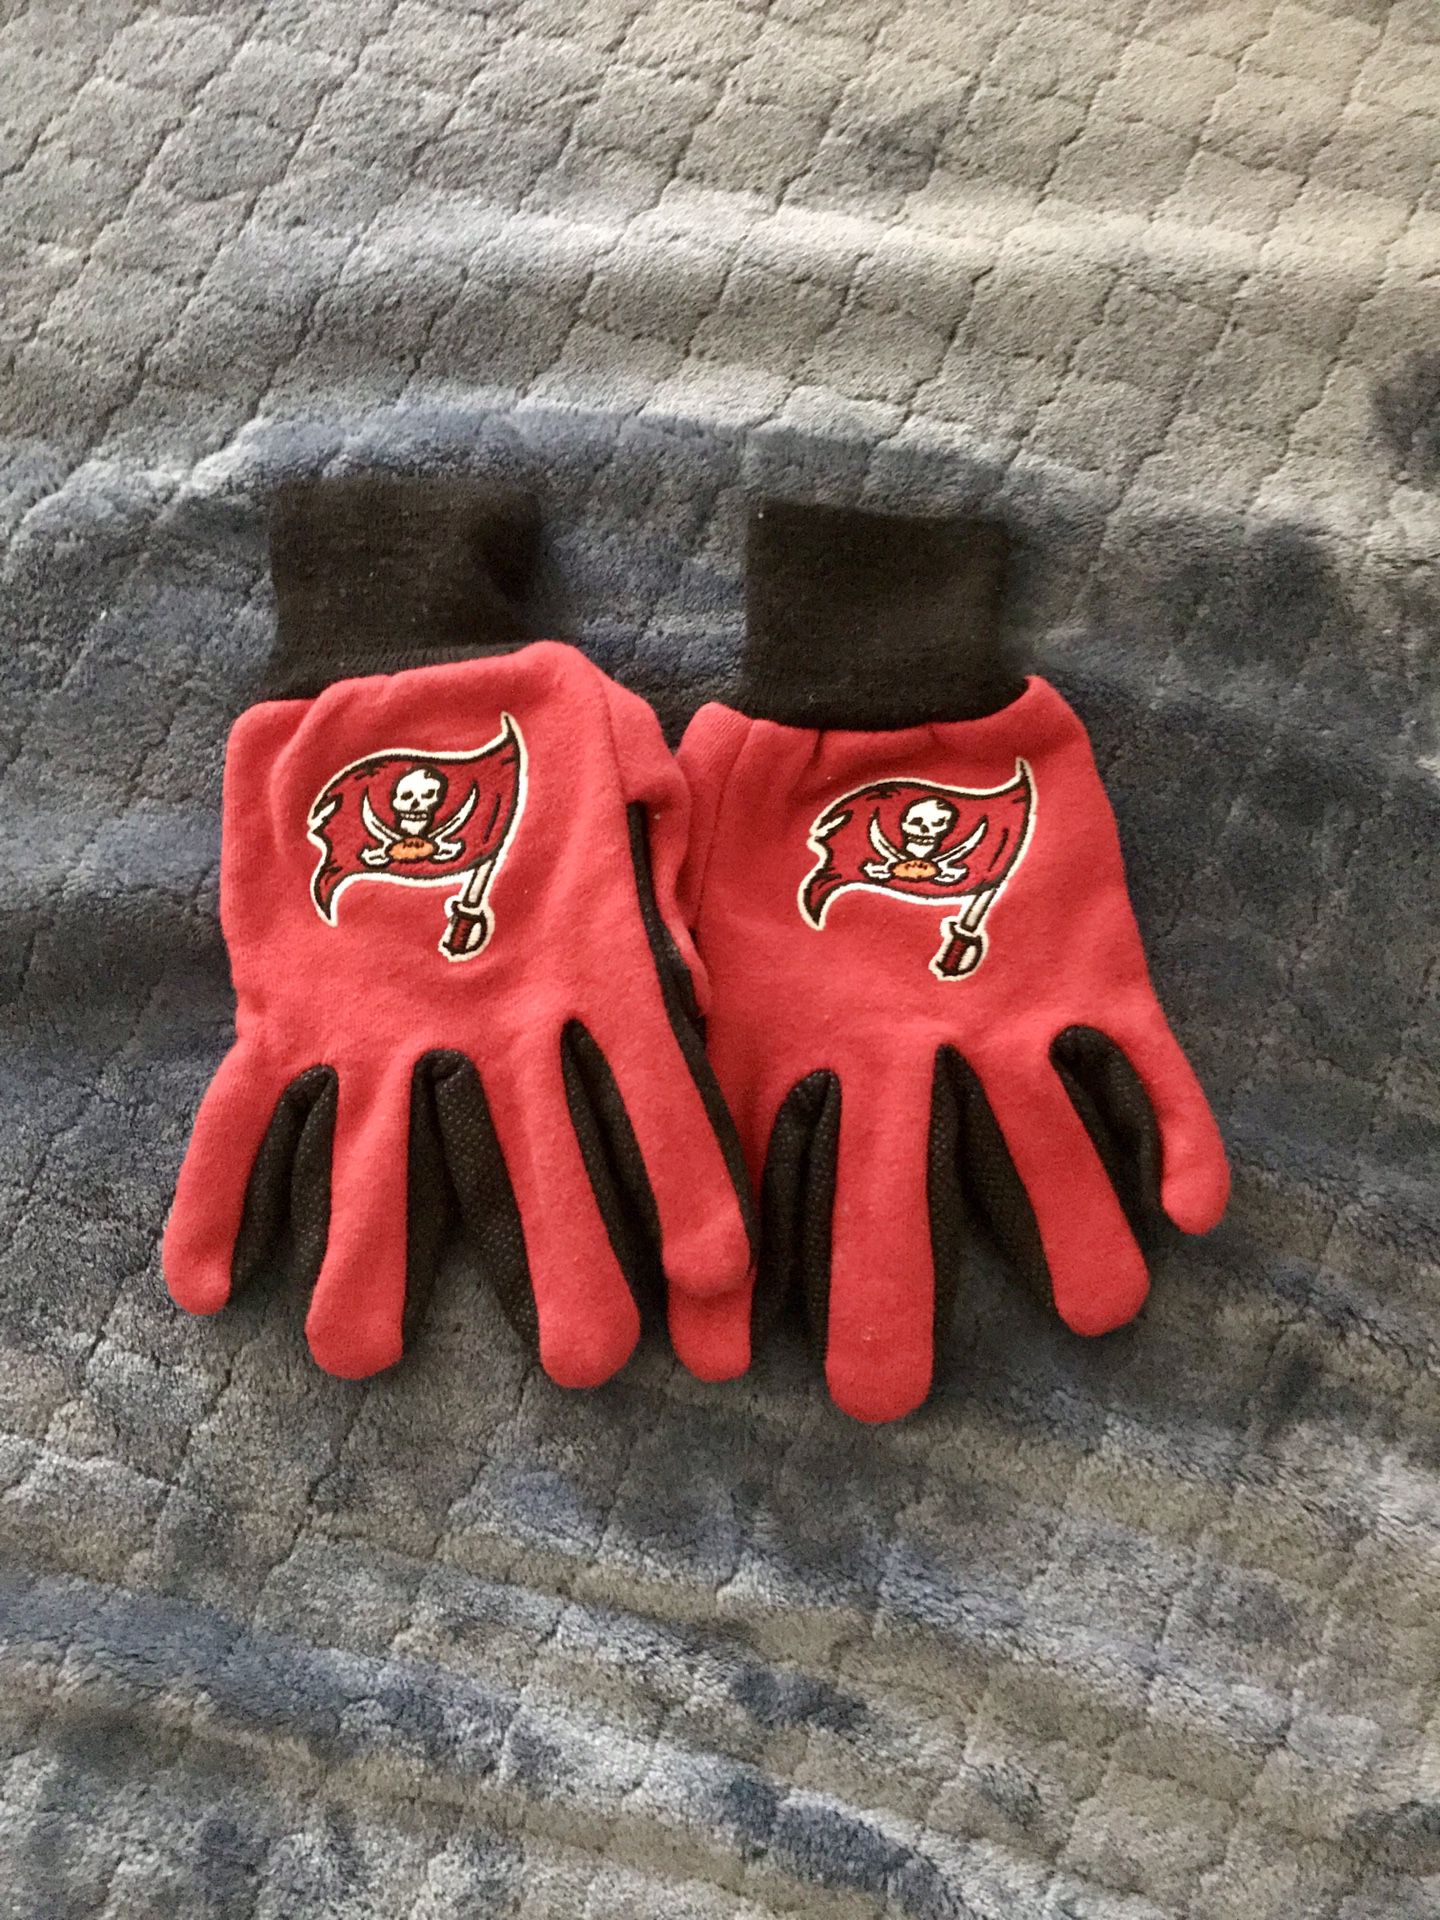 Tampa Bay Buccaneers Gloves (Adult Size)